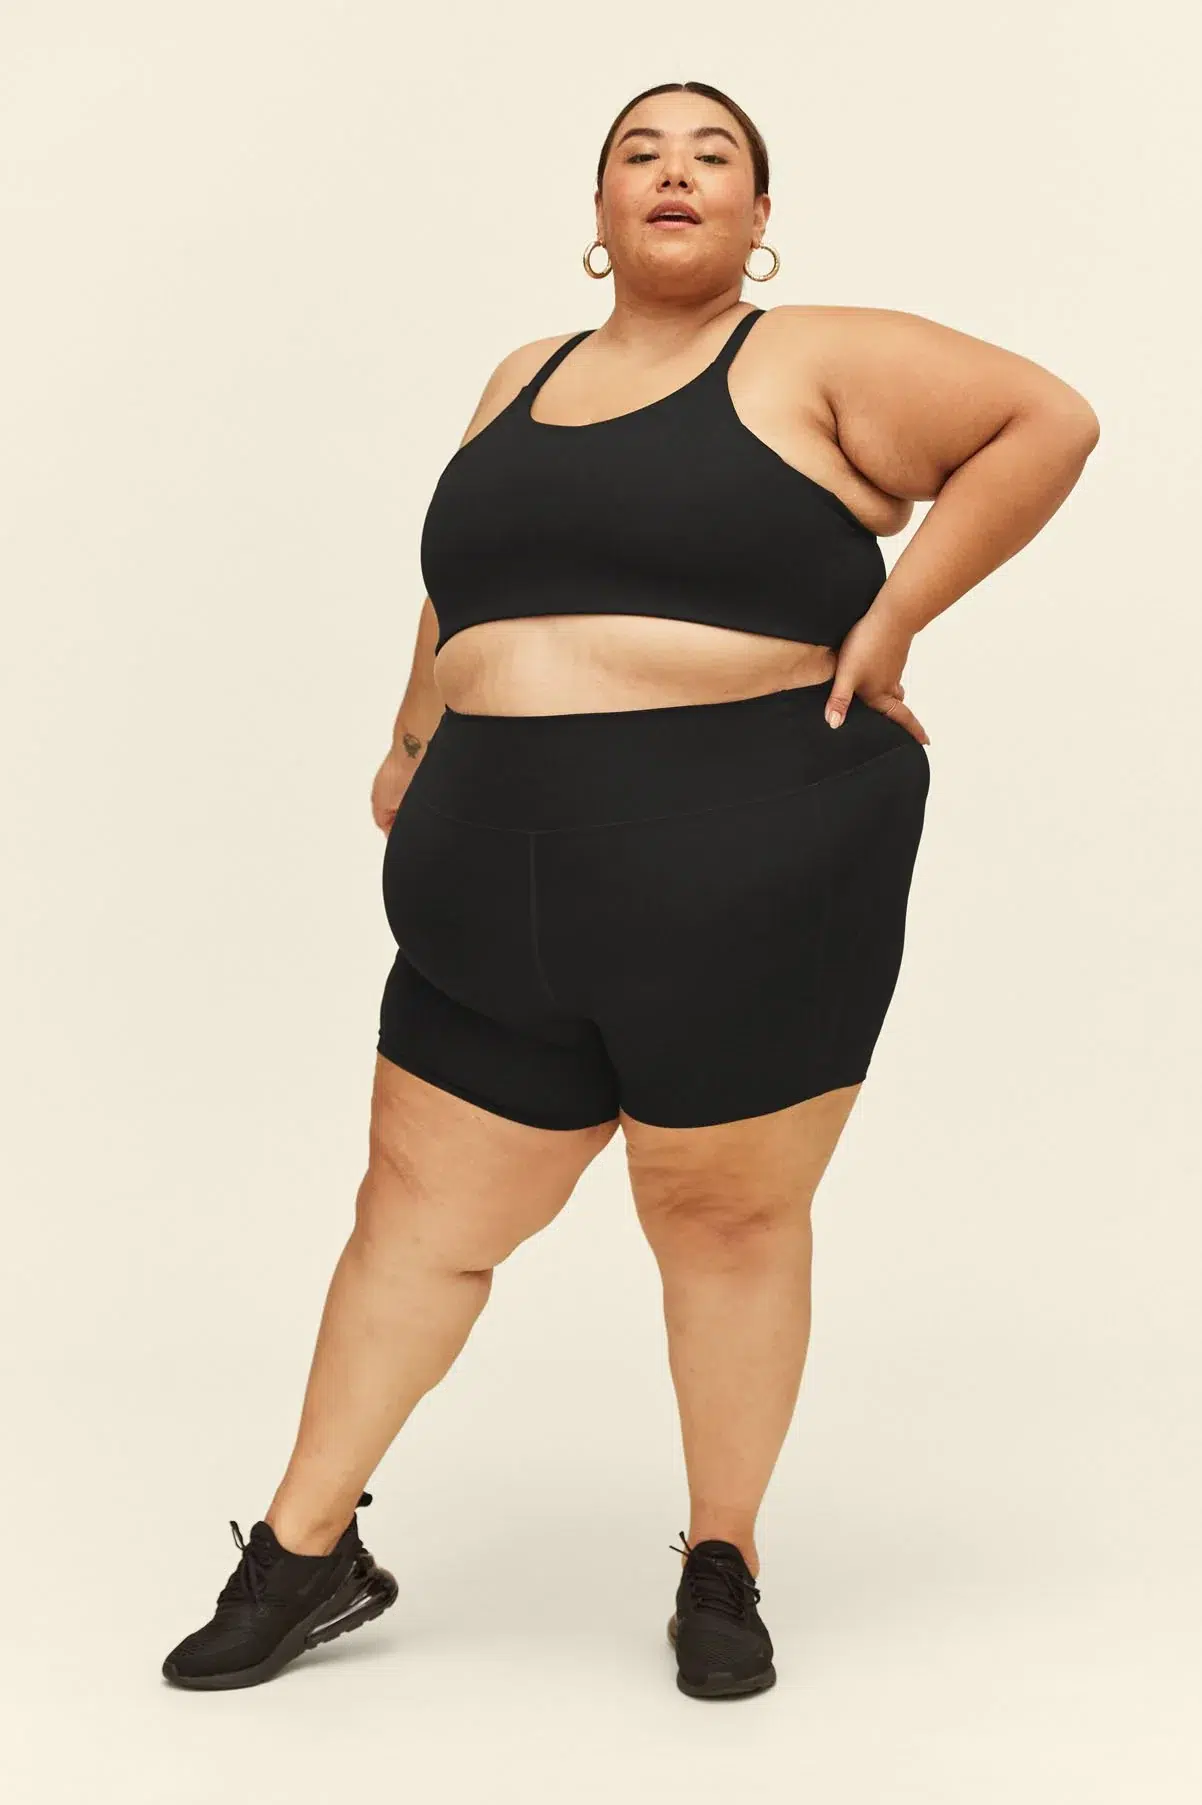 Ethical Activewear: My 3 Favorite Companies for Plus Size Ethical